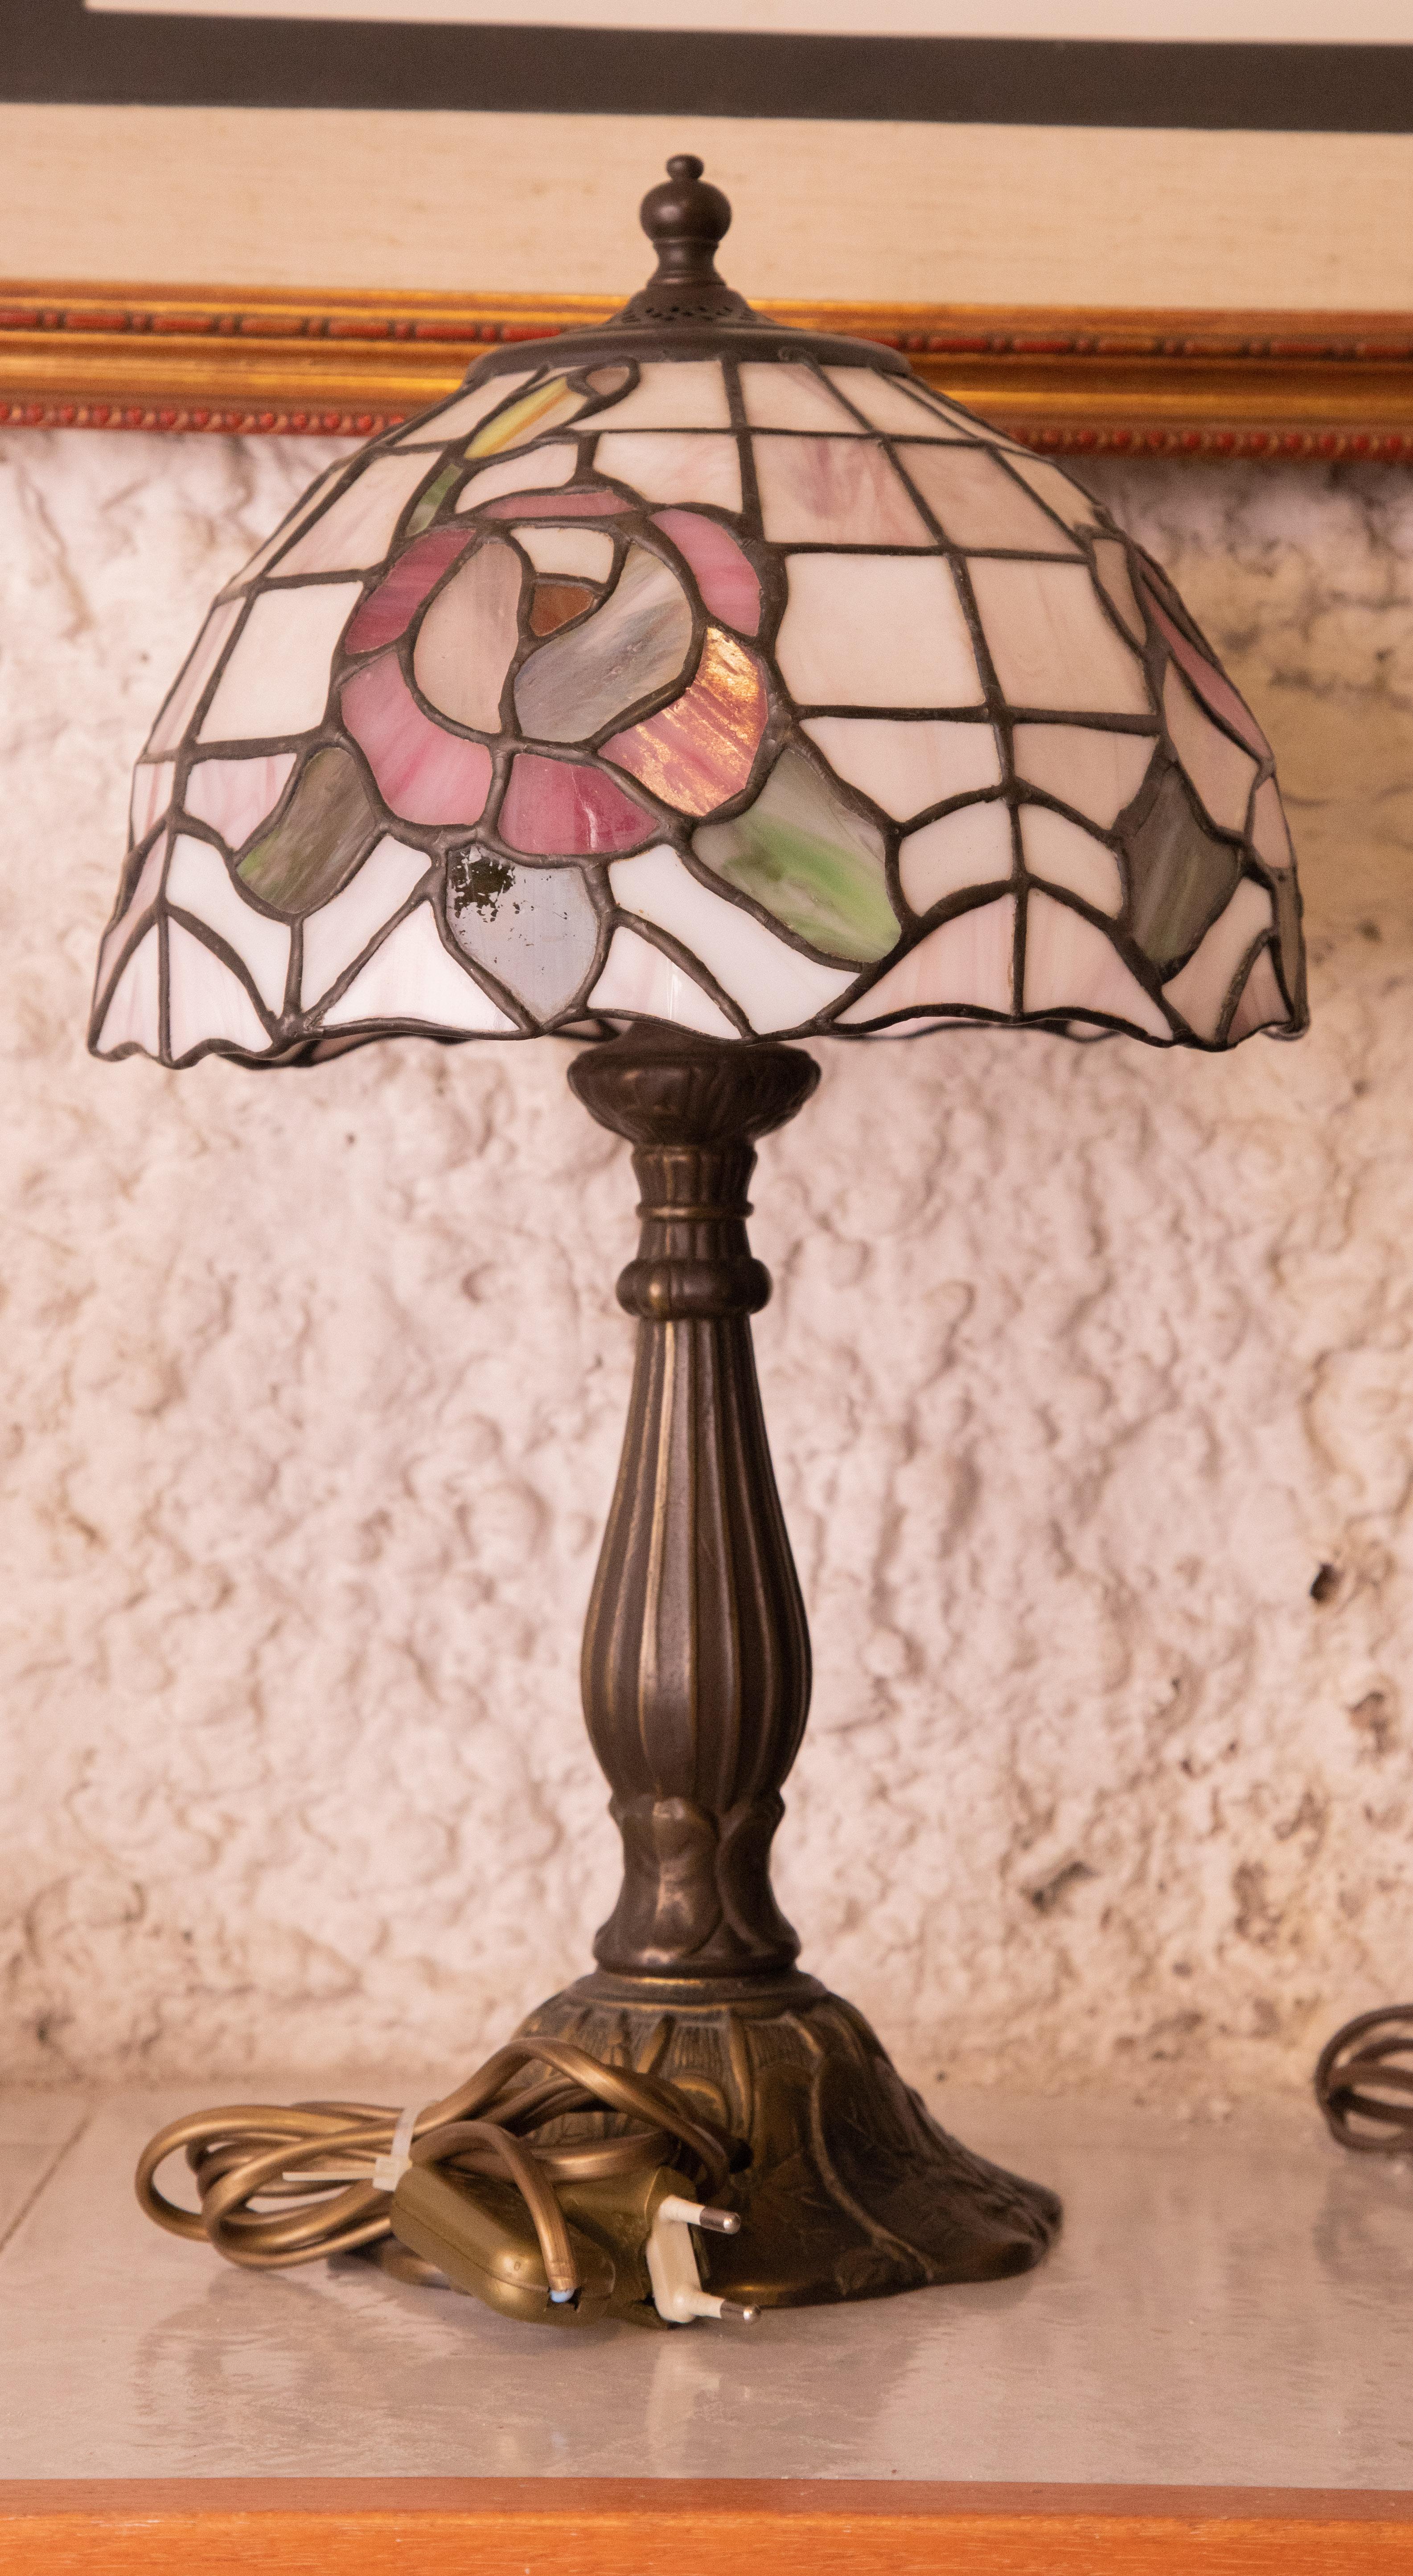 1930 Tiffany Lamp - 5 For Sale on 1stDibs